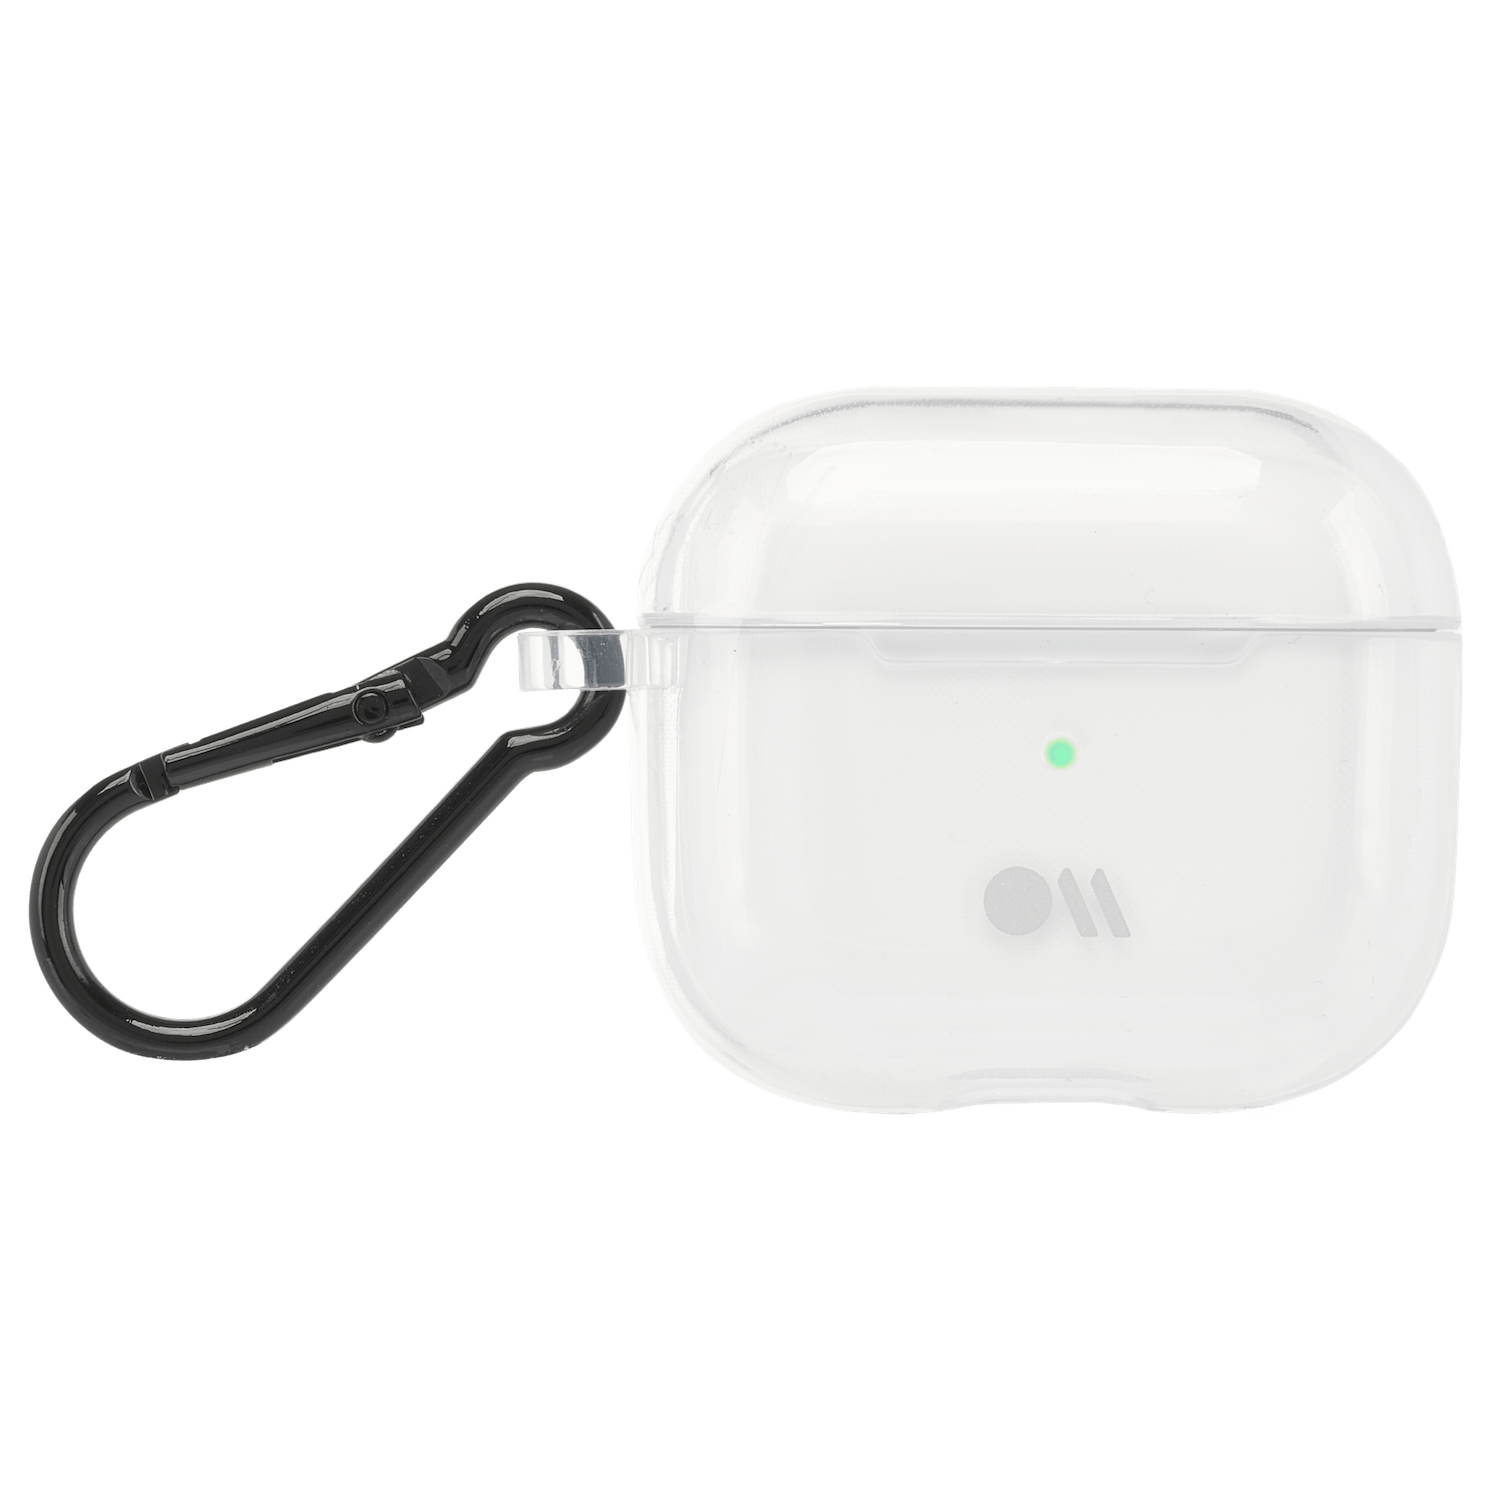 For Apple AirPods 3rd gen case cover & Clip